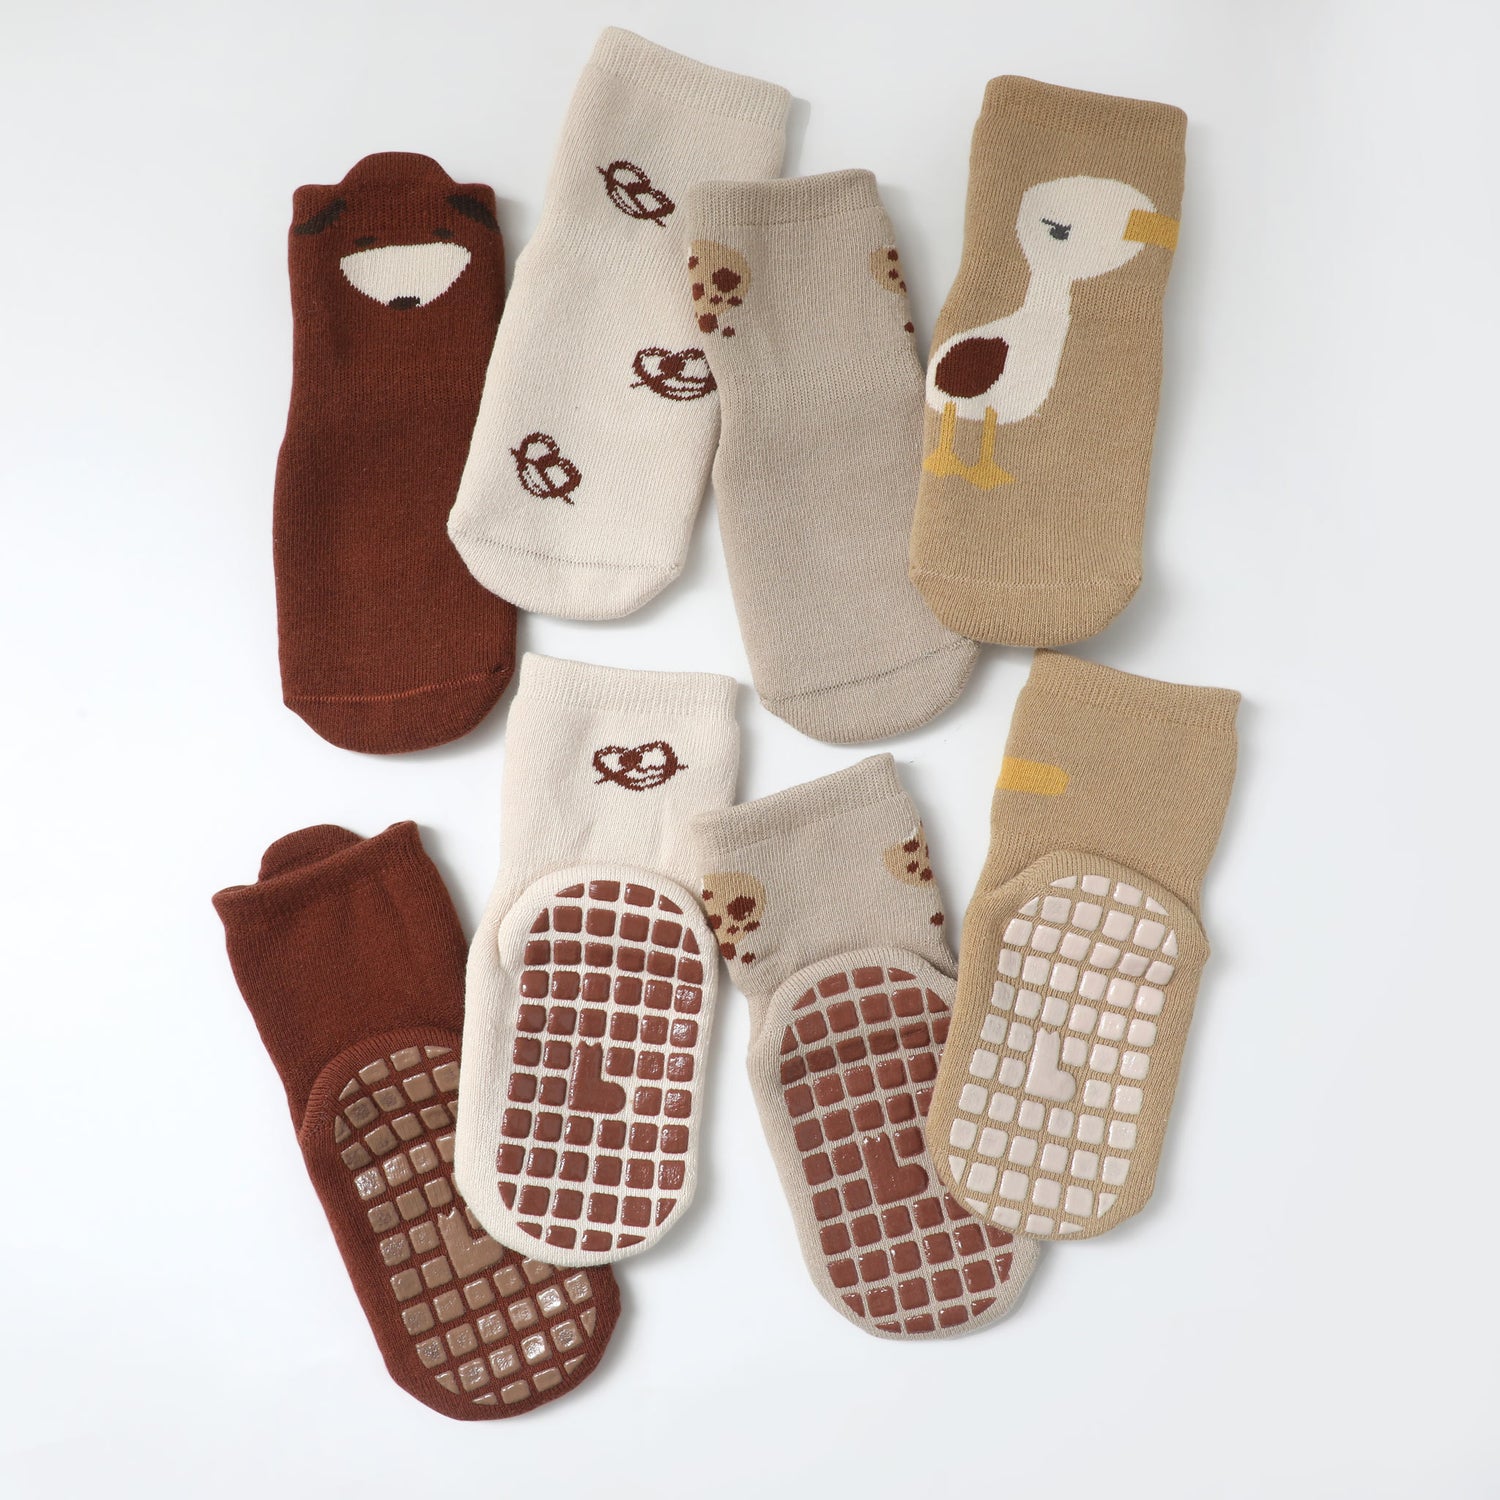 Specialized baby socks featuring non-slip ankle grips to ensure stability and comfort.